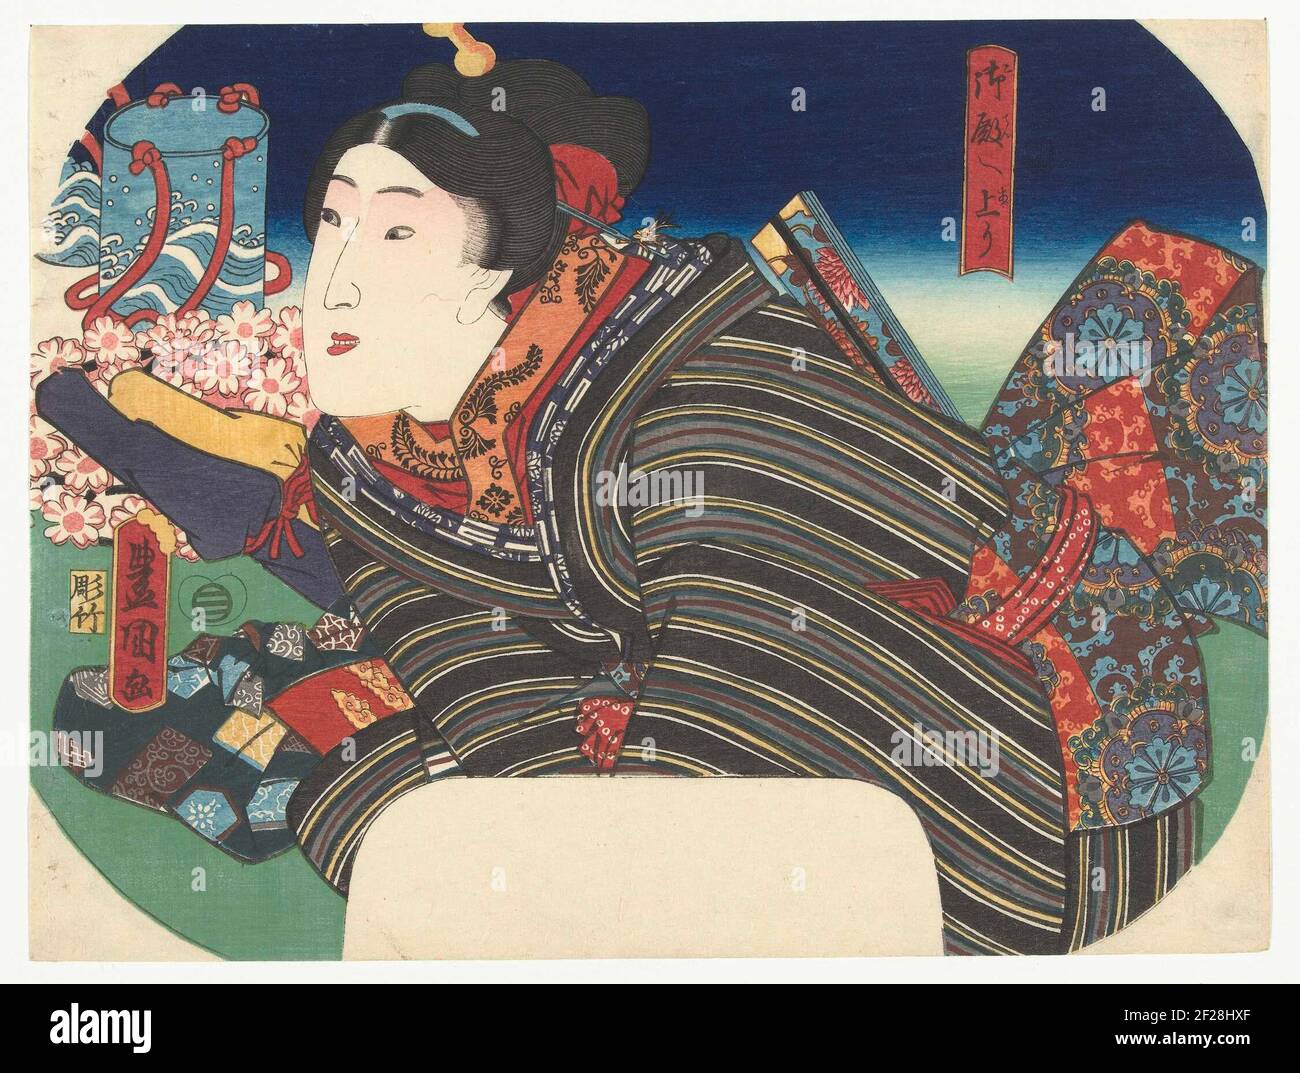 Woman with water pots. Range print; Woman in striped kimono, seen from aside, with a dense range on her back on which pattern of chrysanthemums, looking in the direction of two pots with waves pattern, including pink flowers. Stock Photo